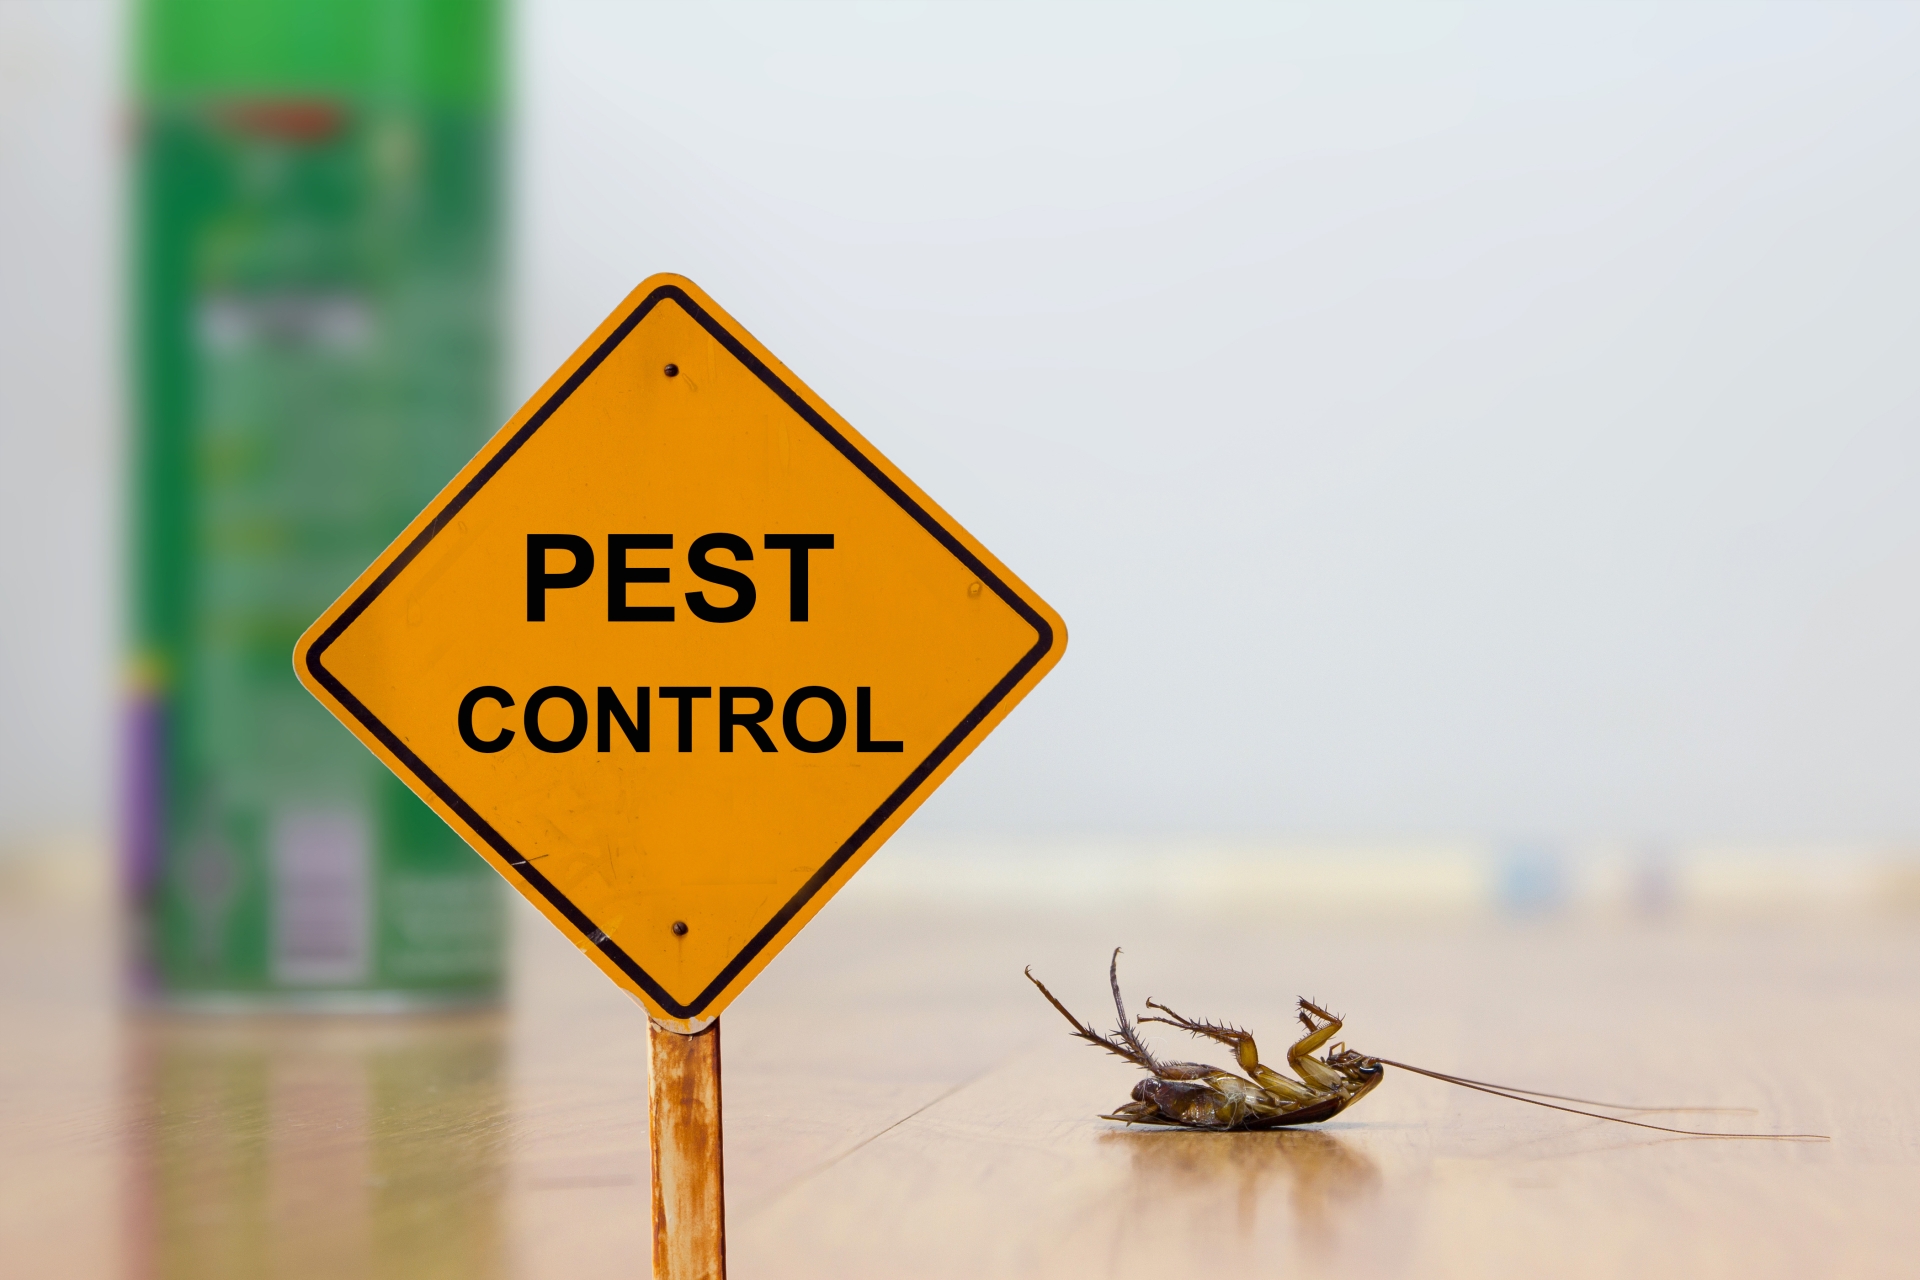 24 Hour Pest Control, Pest Control in Chingford, Highams Park, E4. Call Now 020 8166 9746